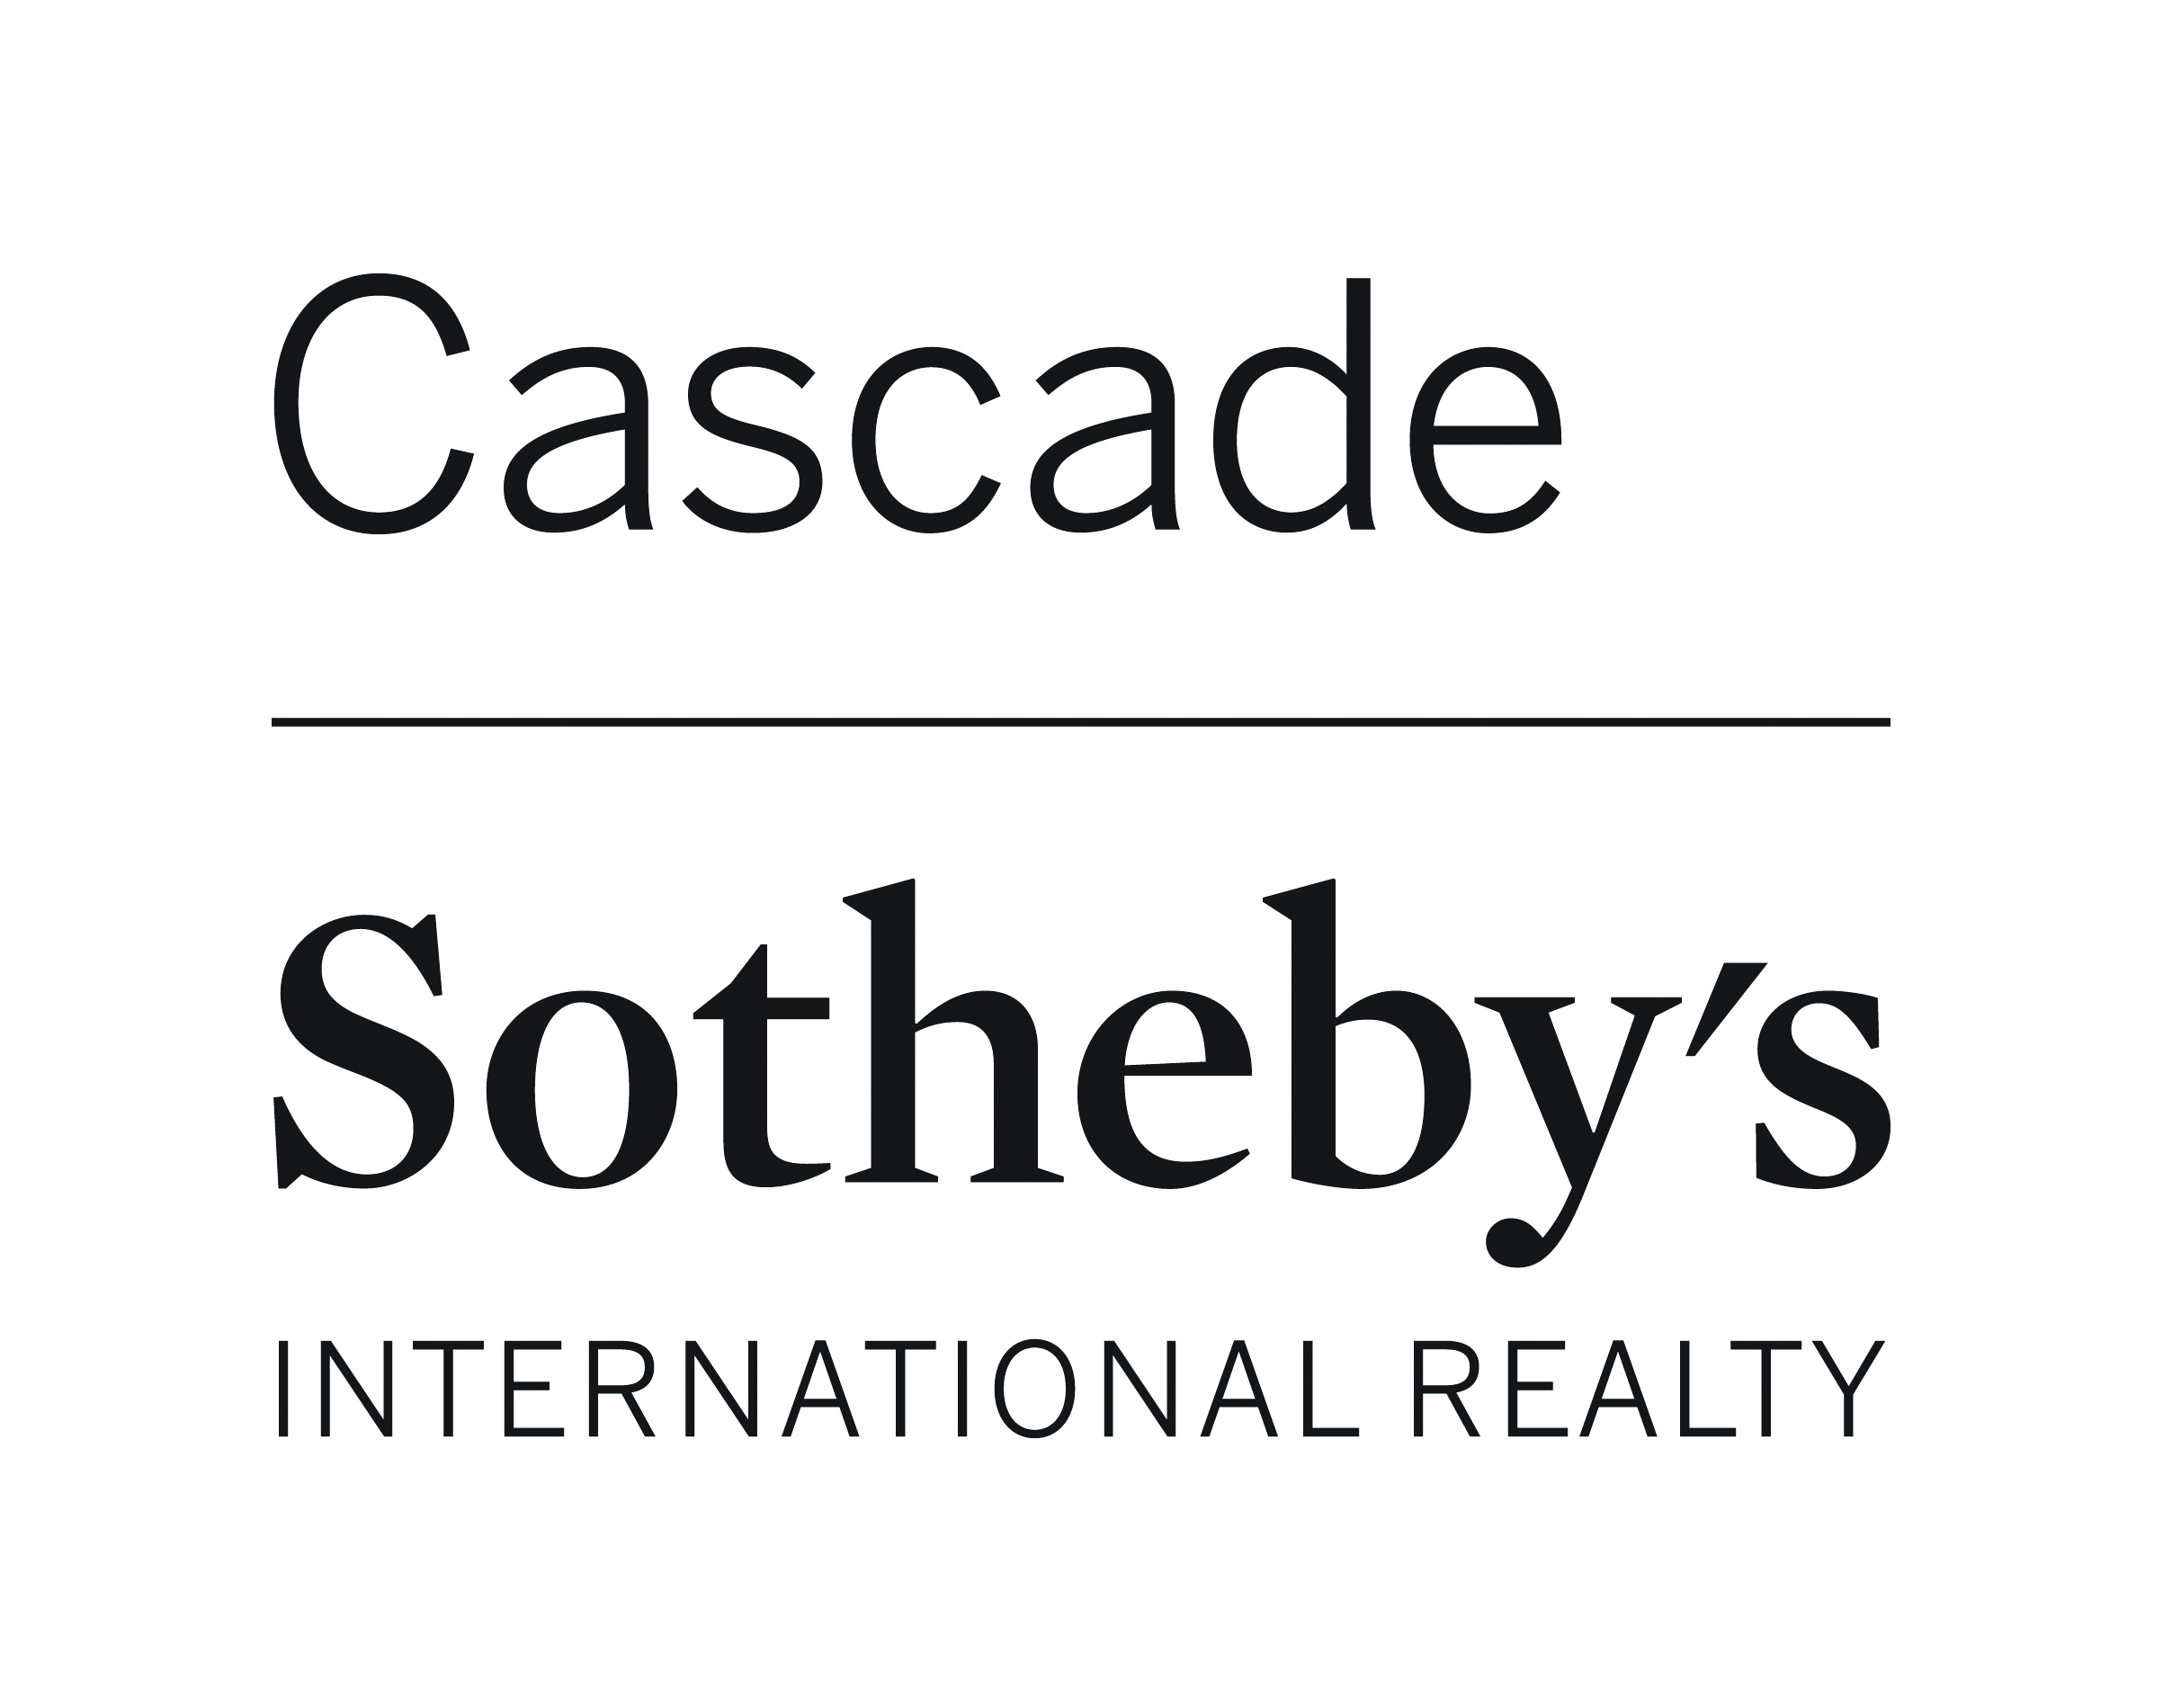 Cascade Sotheby's International realty adds 47 new brokers year-to-date--grows marketshare throughout Oregon.